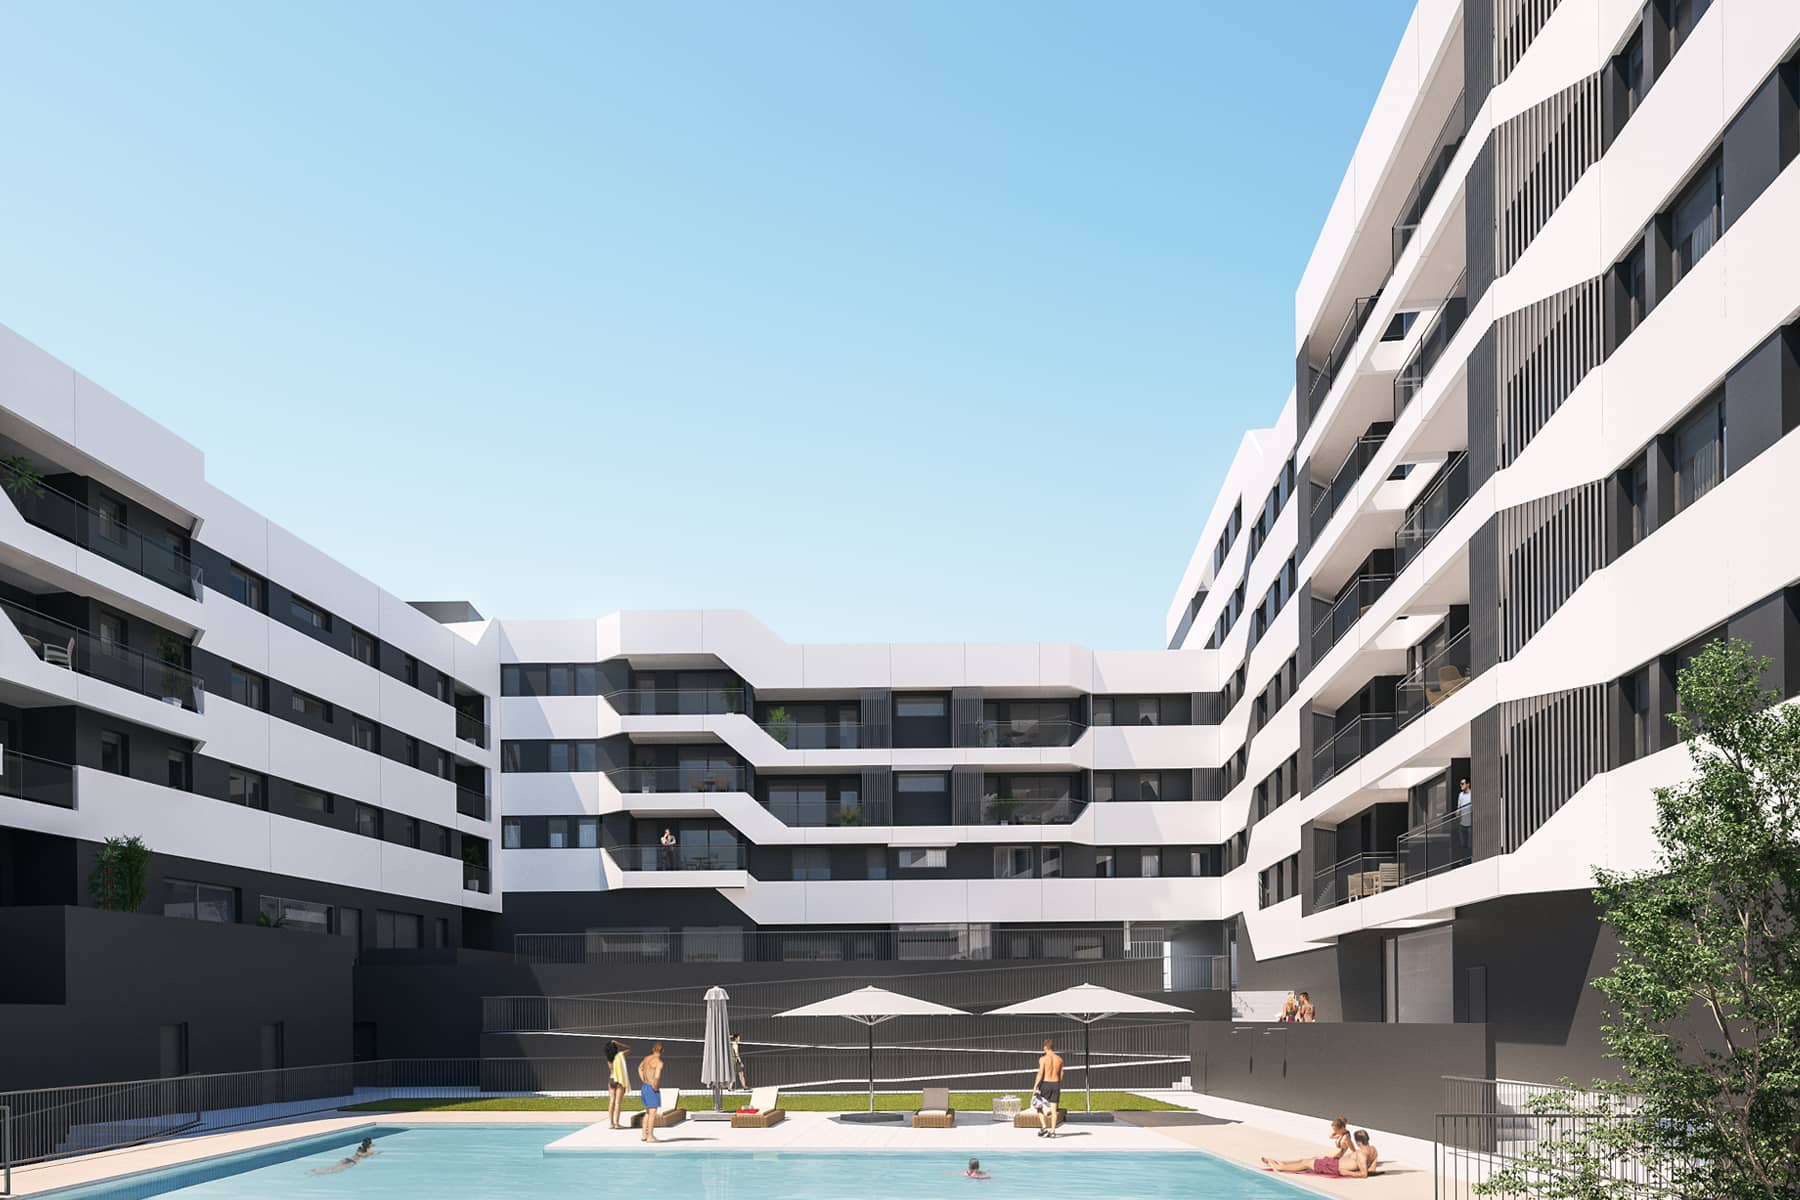 This project is located in the center of the city, but it offers a feeling of open spaces with large terraces overlooking the sea and gardens in the common areas.